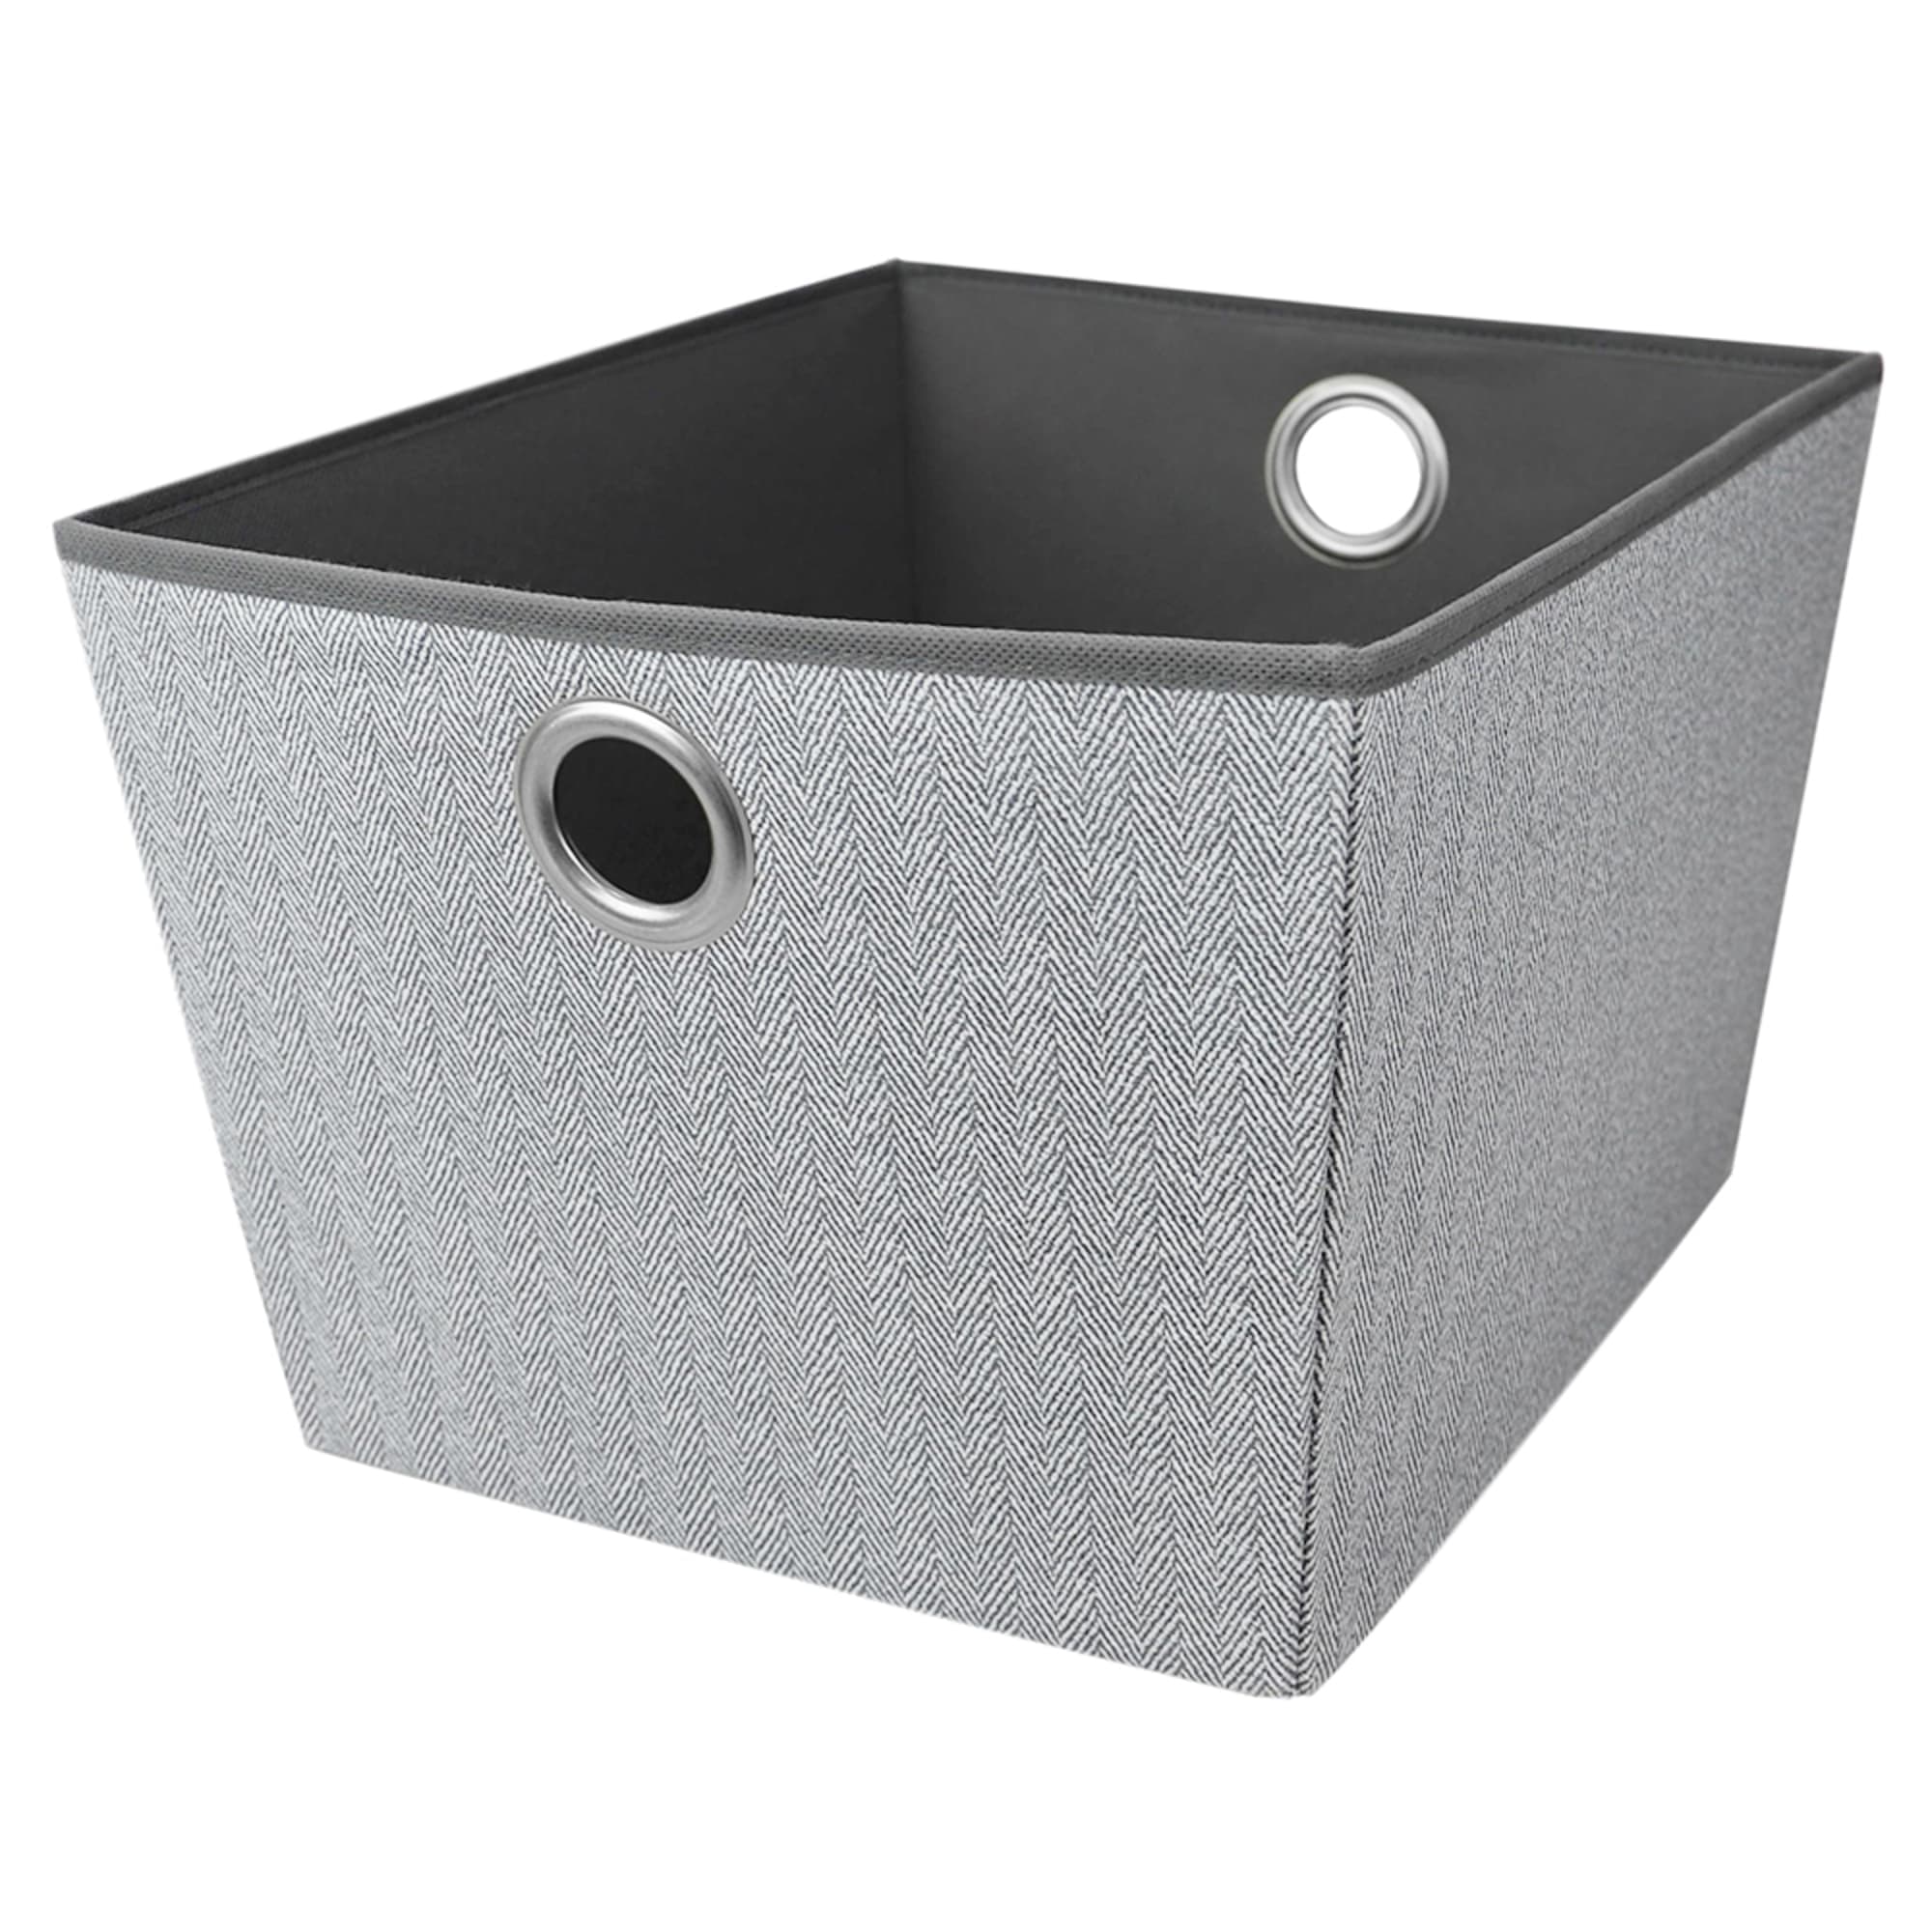 Home Basics Herringbone Large Non-Woven Open Storage Tote, Grey $6.00 EACH, CASE PACK OF 12